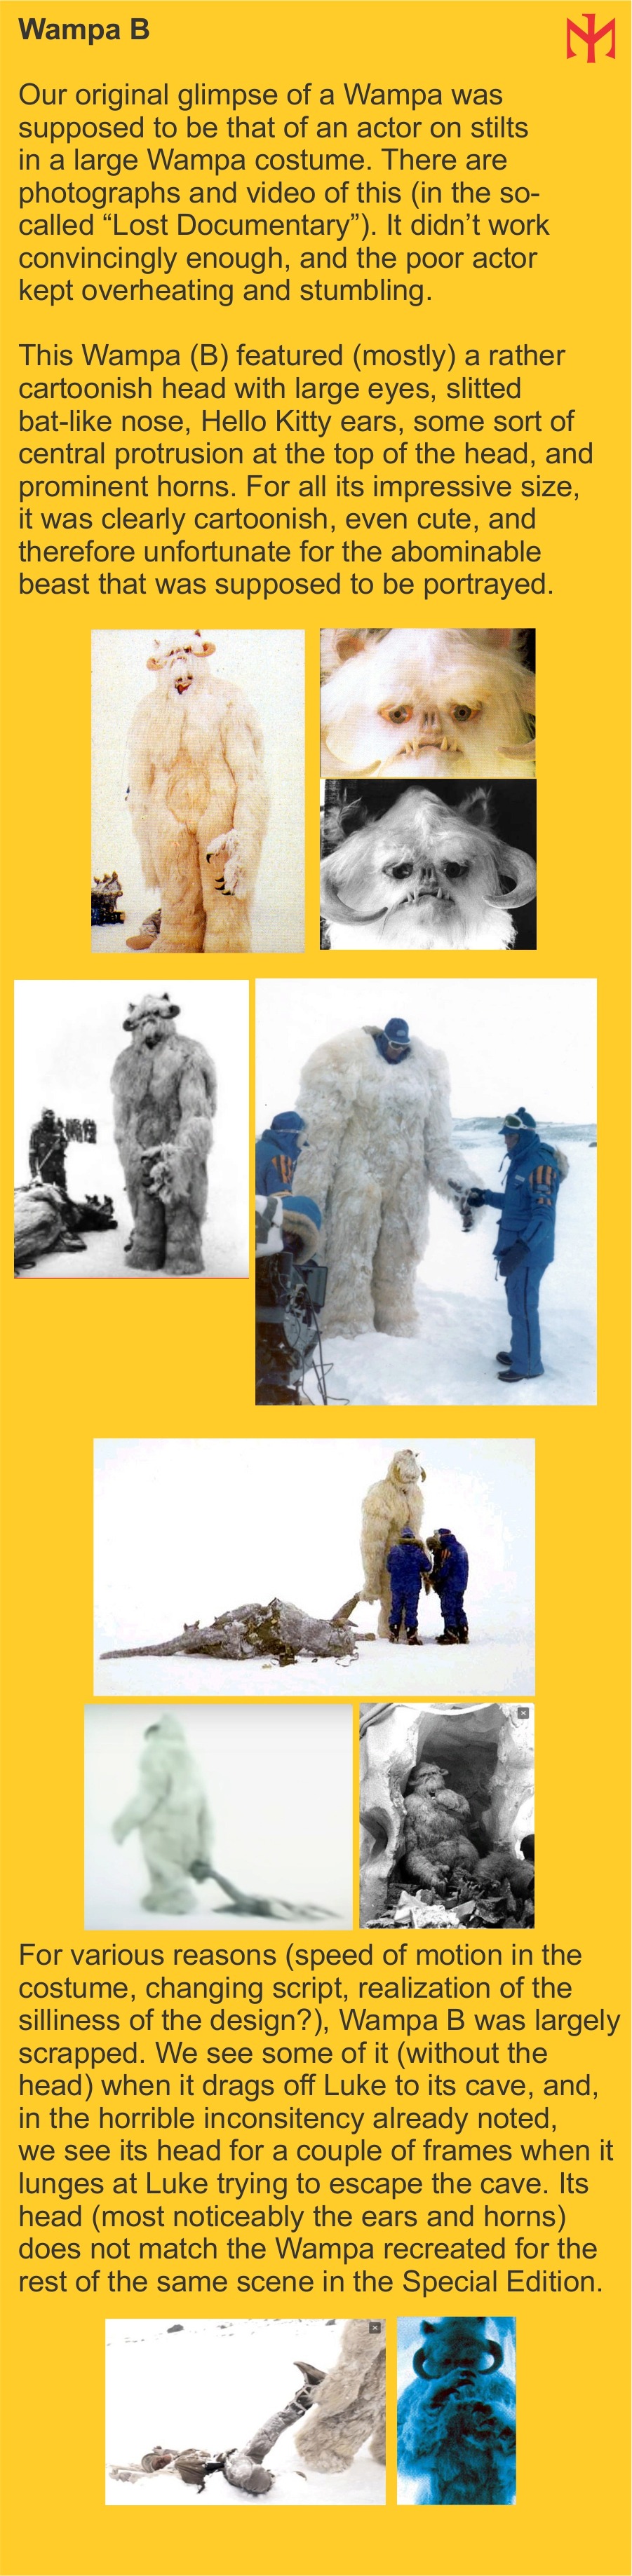 starwars - Tiffany, Tanya, and Willie (Tauntauns and Wampas): Updated Oct 22 2022 - Page 2 Twswc029